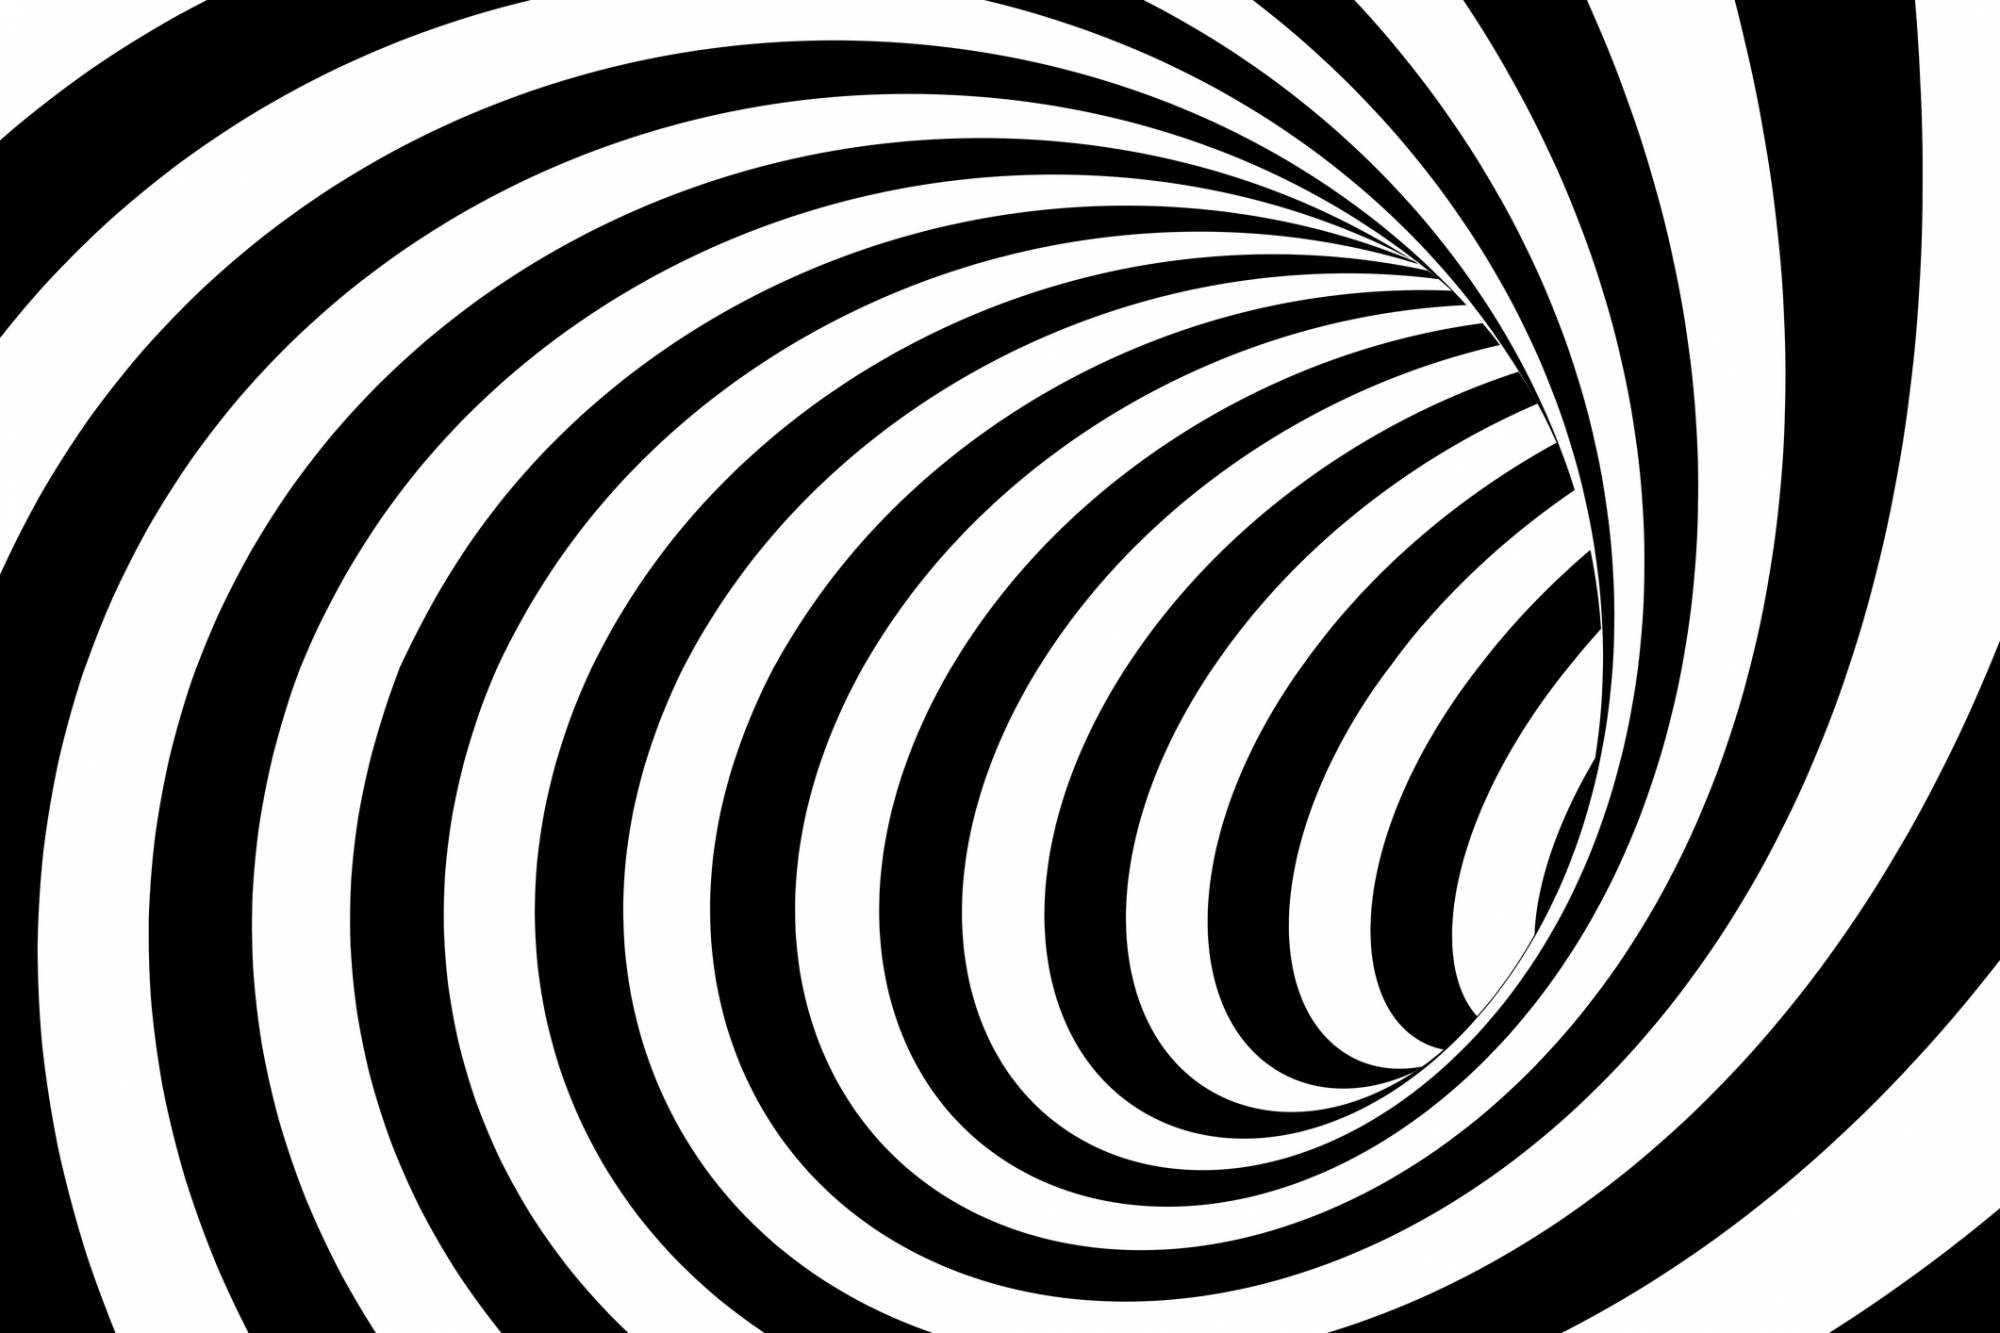 Pictures In Pictures Optical Illusions An Lined Optical Illusion Went